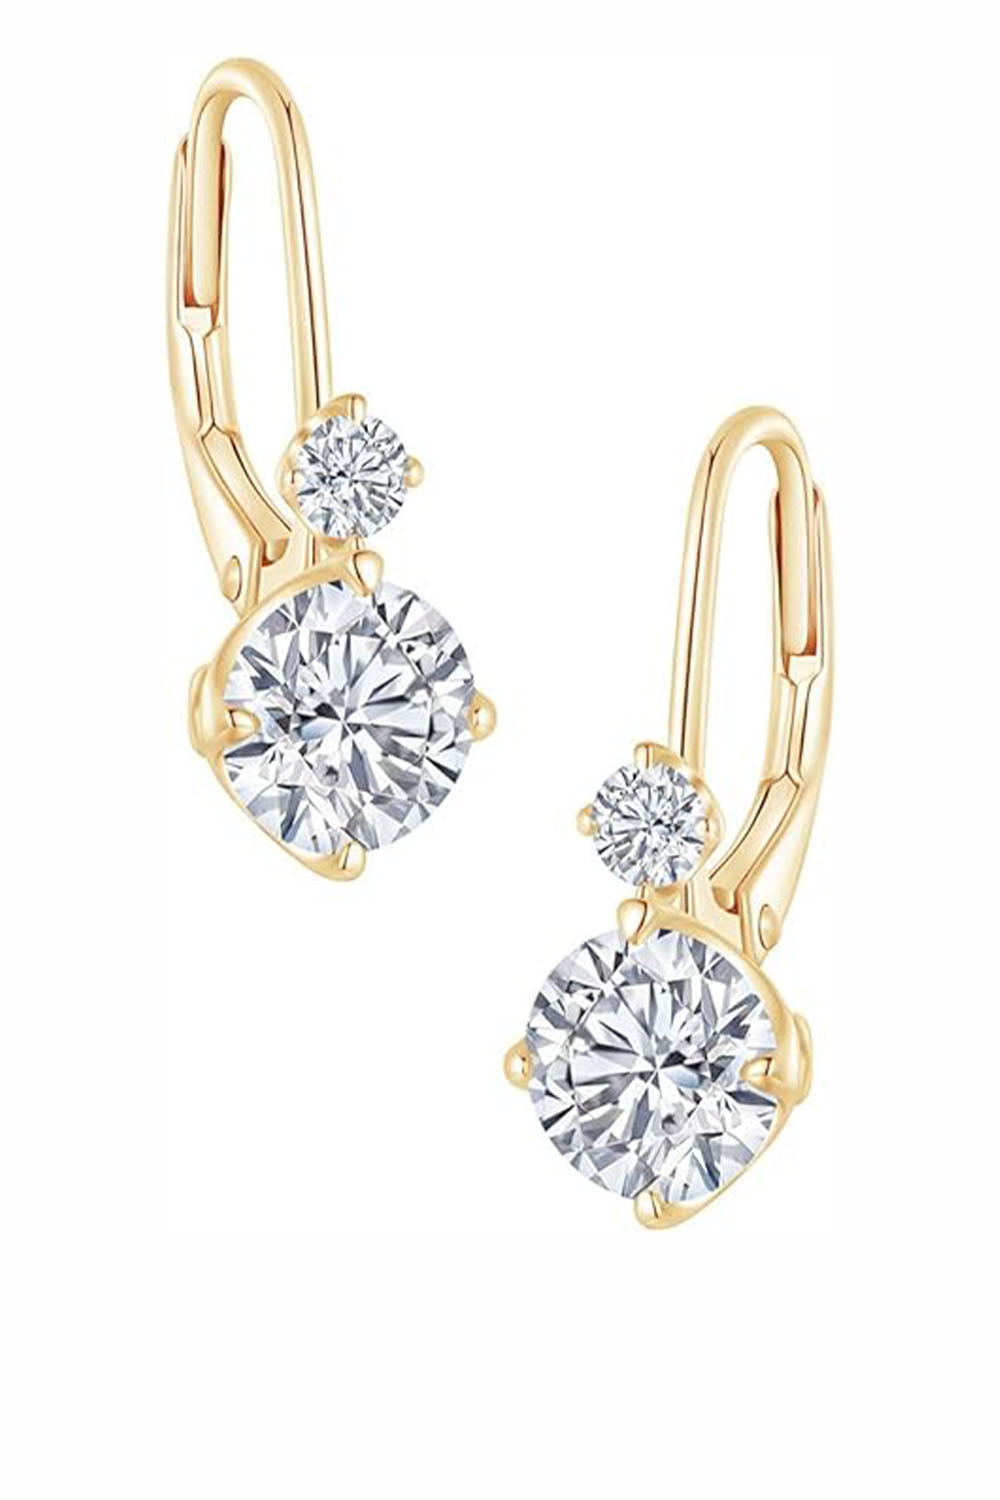 1 Carat Moissanite Hoop Earrings in 18K Gold Plated Sterling Silver D Color Hypoallergenic Jewellery Gifts.